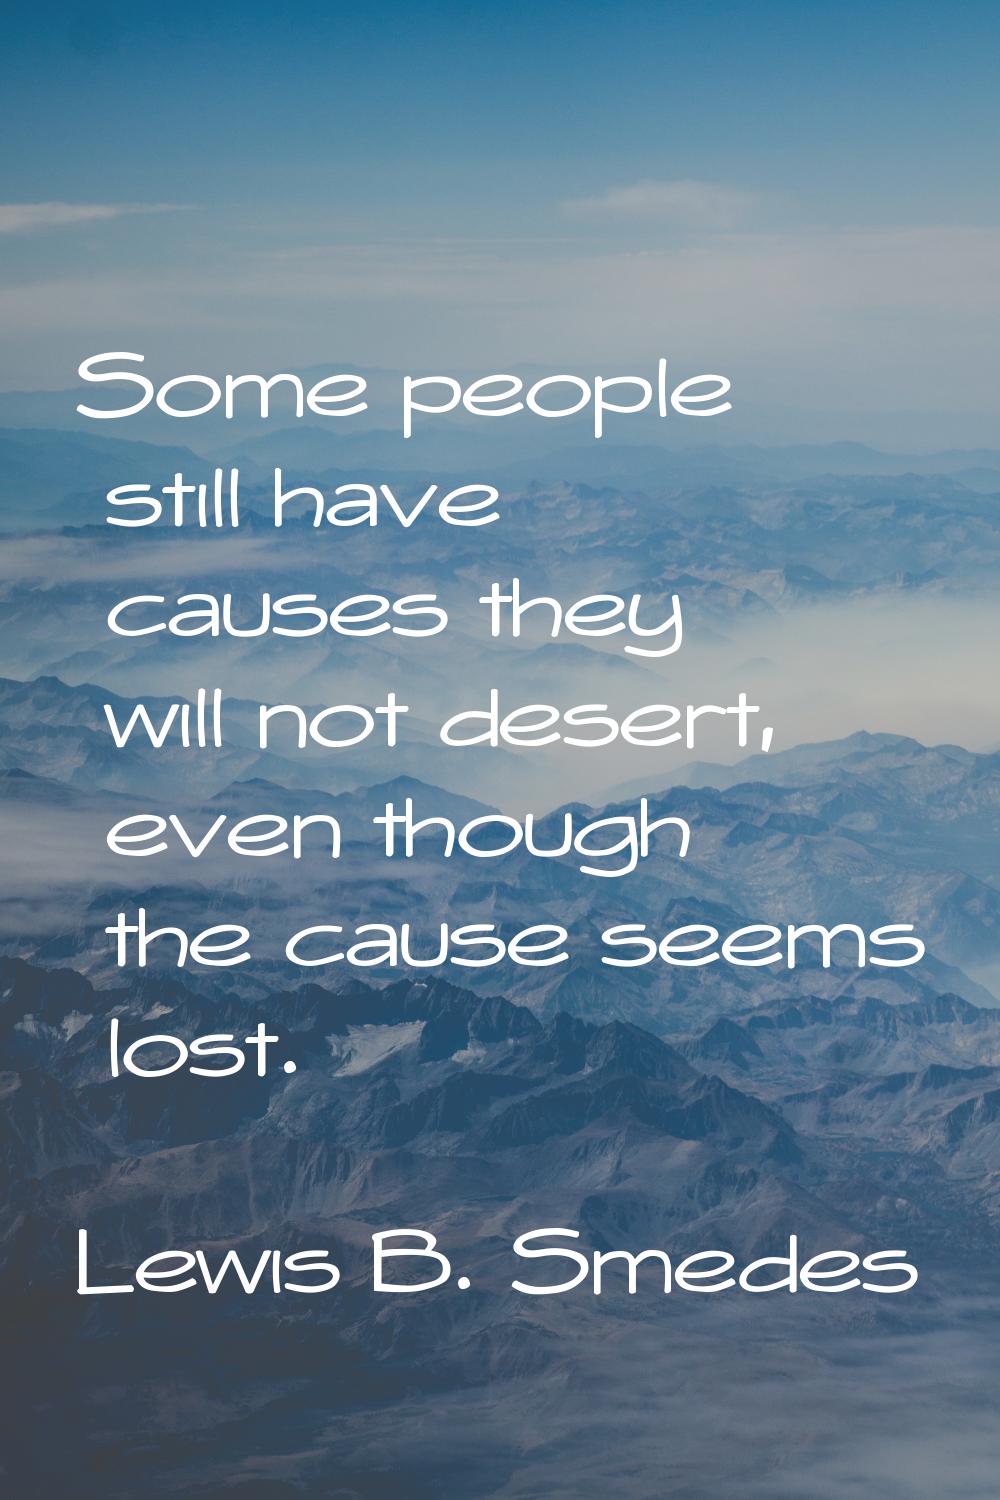 Some people still have causes they will not desert, even though the cause seems lost.